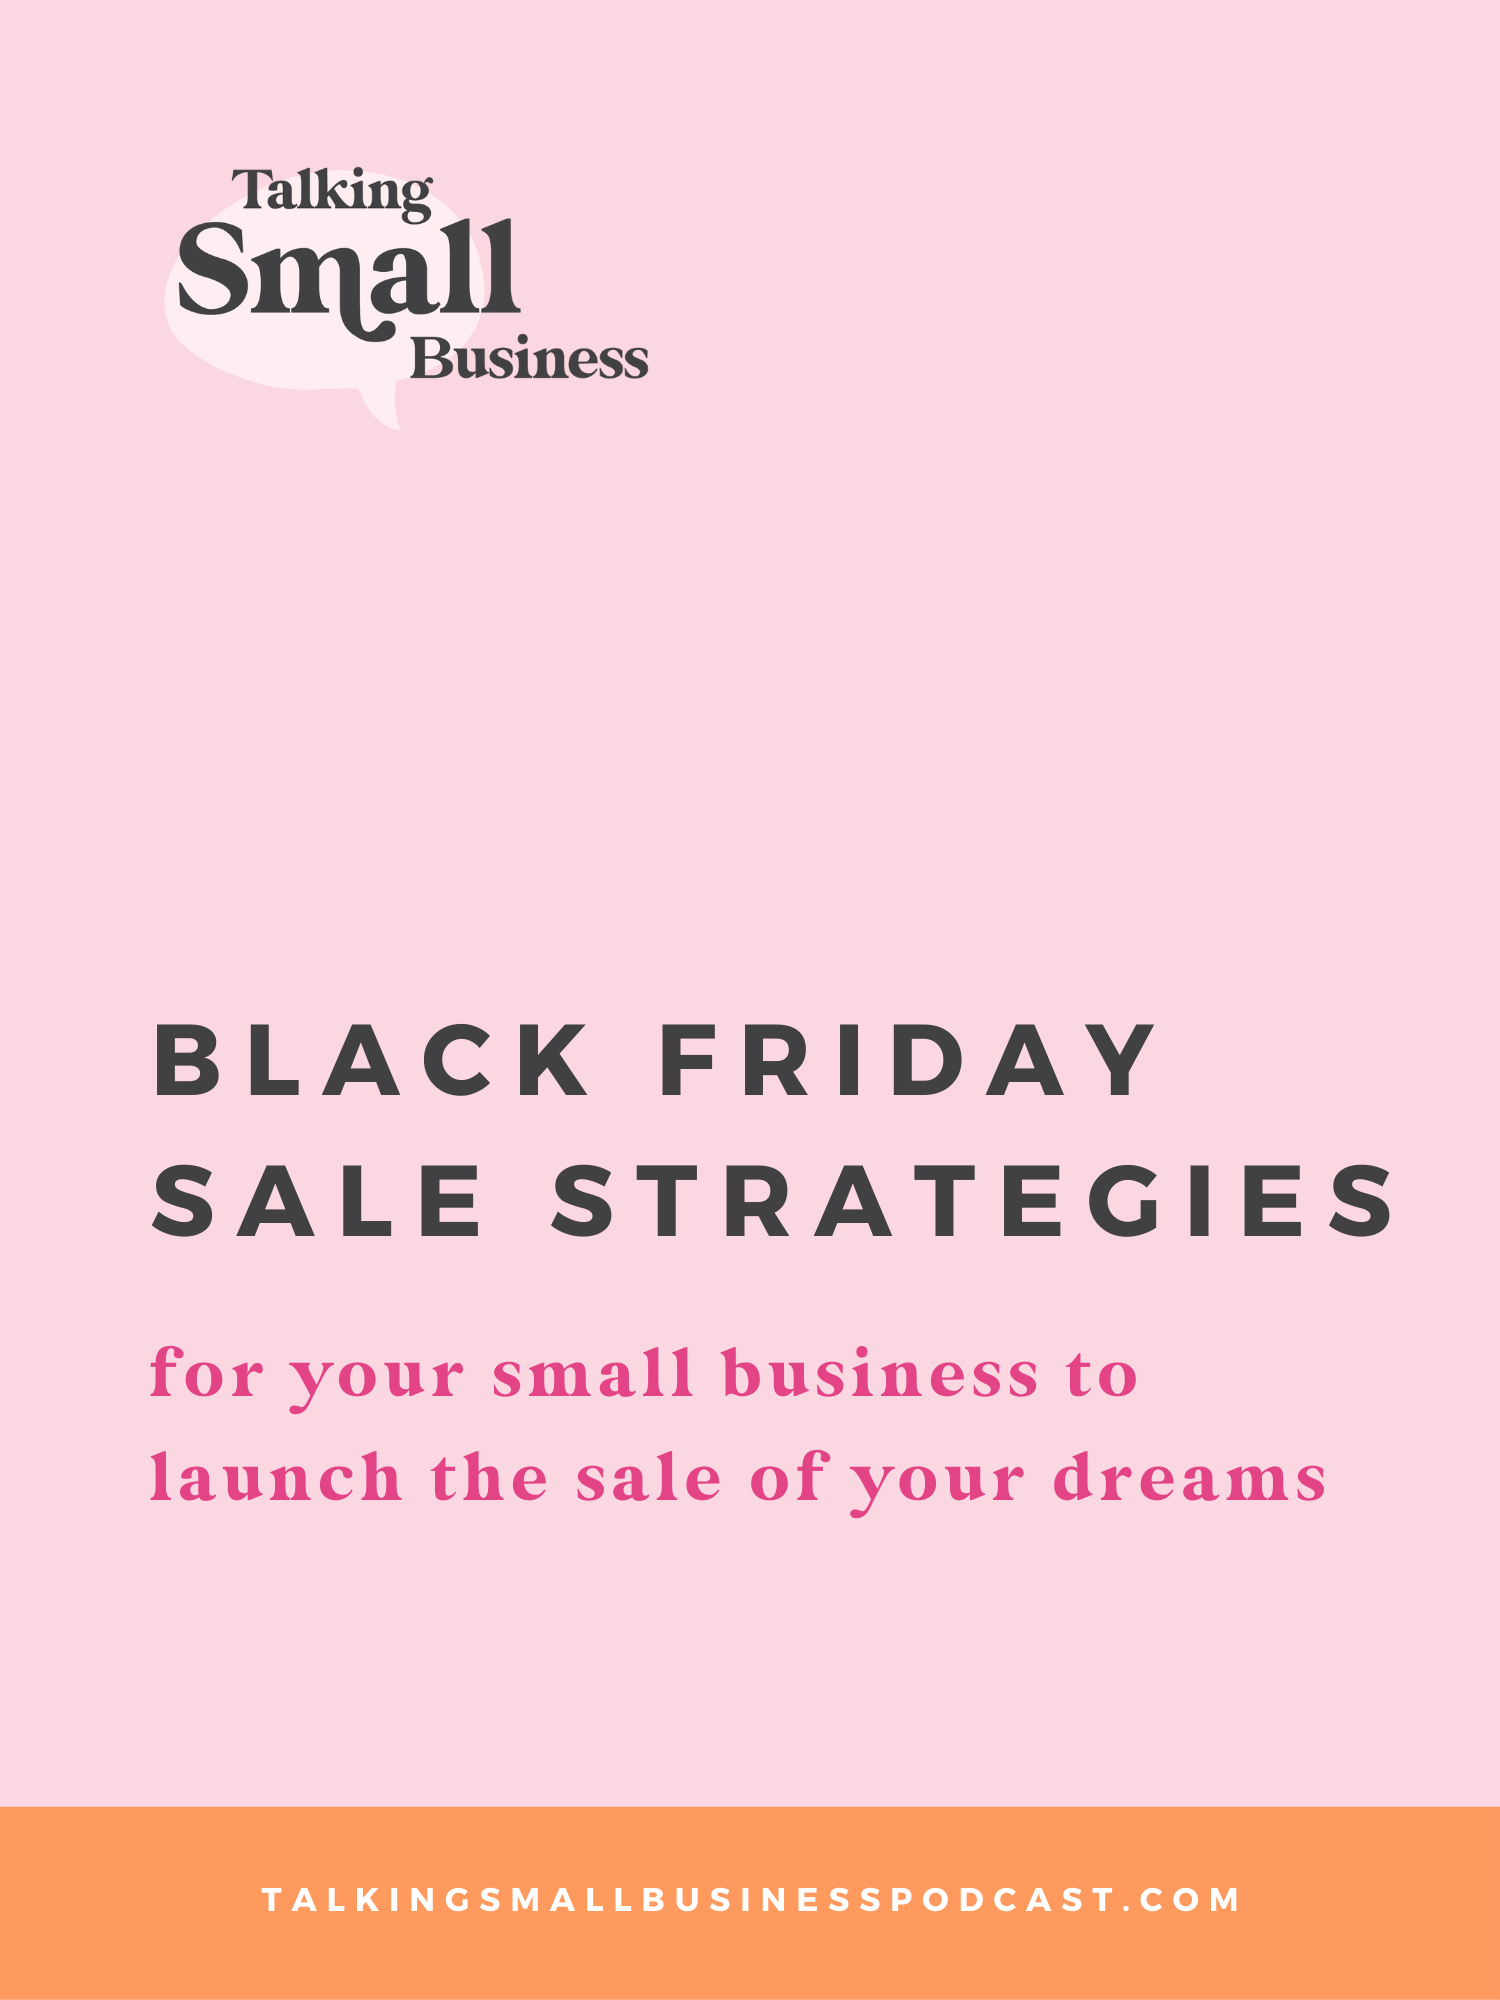 Black Friday sale strategies: tips and tricks for biz owners from the Talking Small Business podcast hosted by Kat Schmoyer and Megan Martin